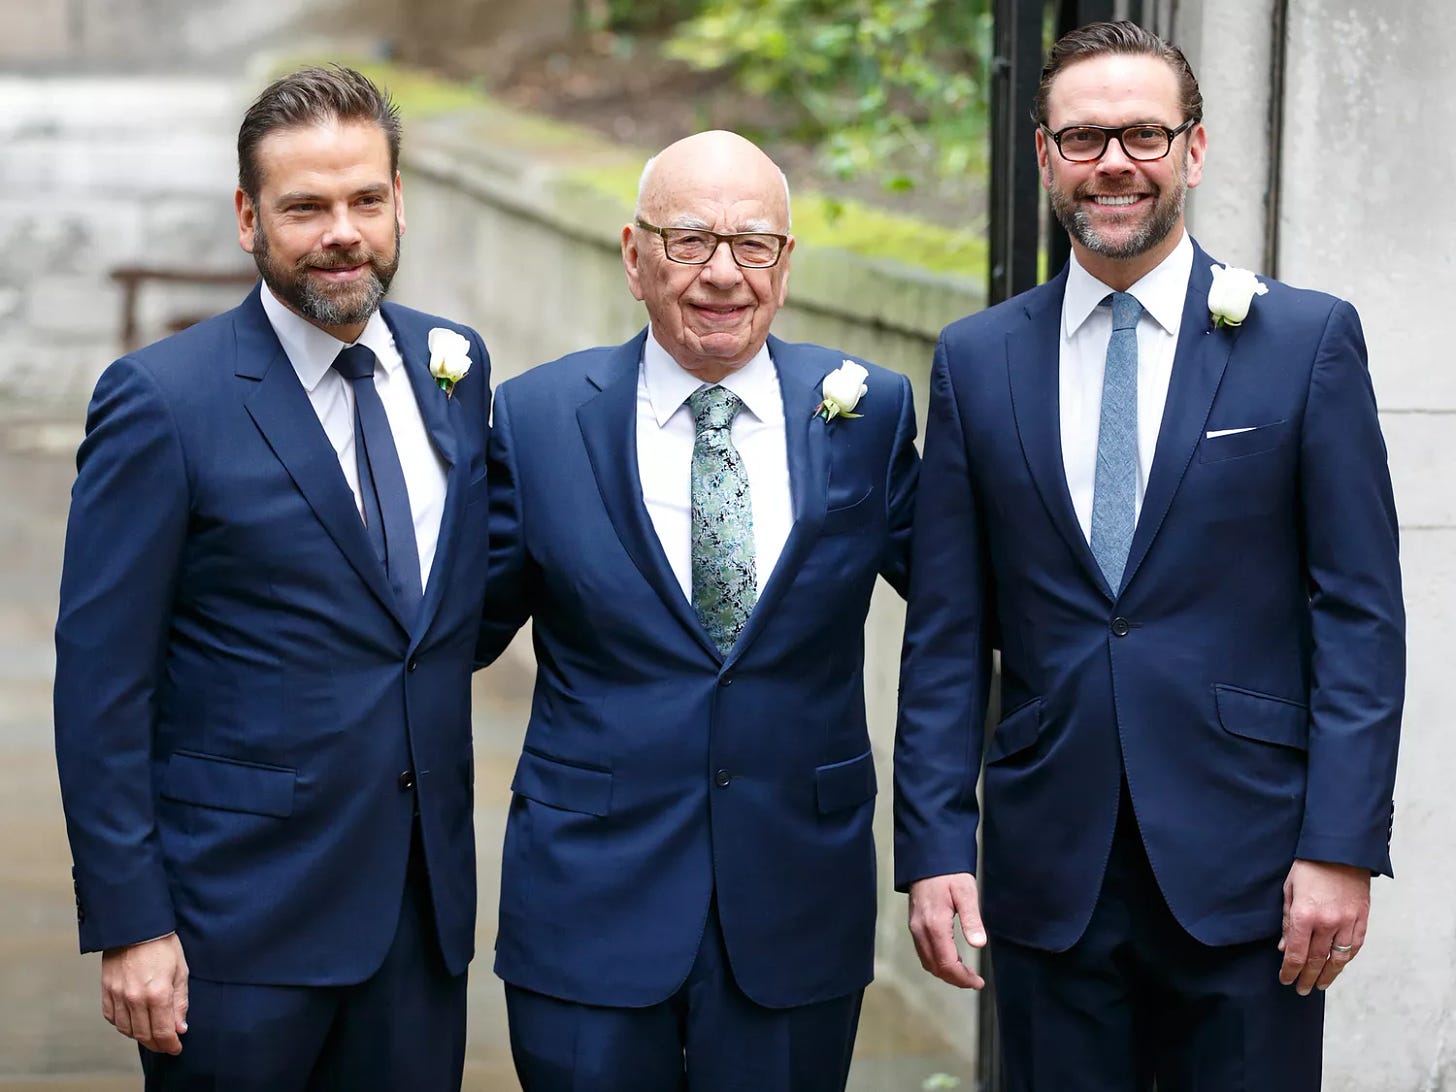 Rupert Murdoch with his sons Lachlan Murdoch (L) and James Murdoch (R) arrives at St Bride's Church for a service to celebrate his marriage to Jerry Hall on March 5, 2016 in London, England